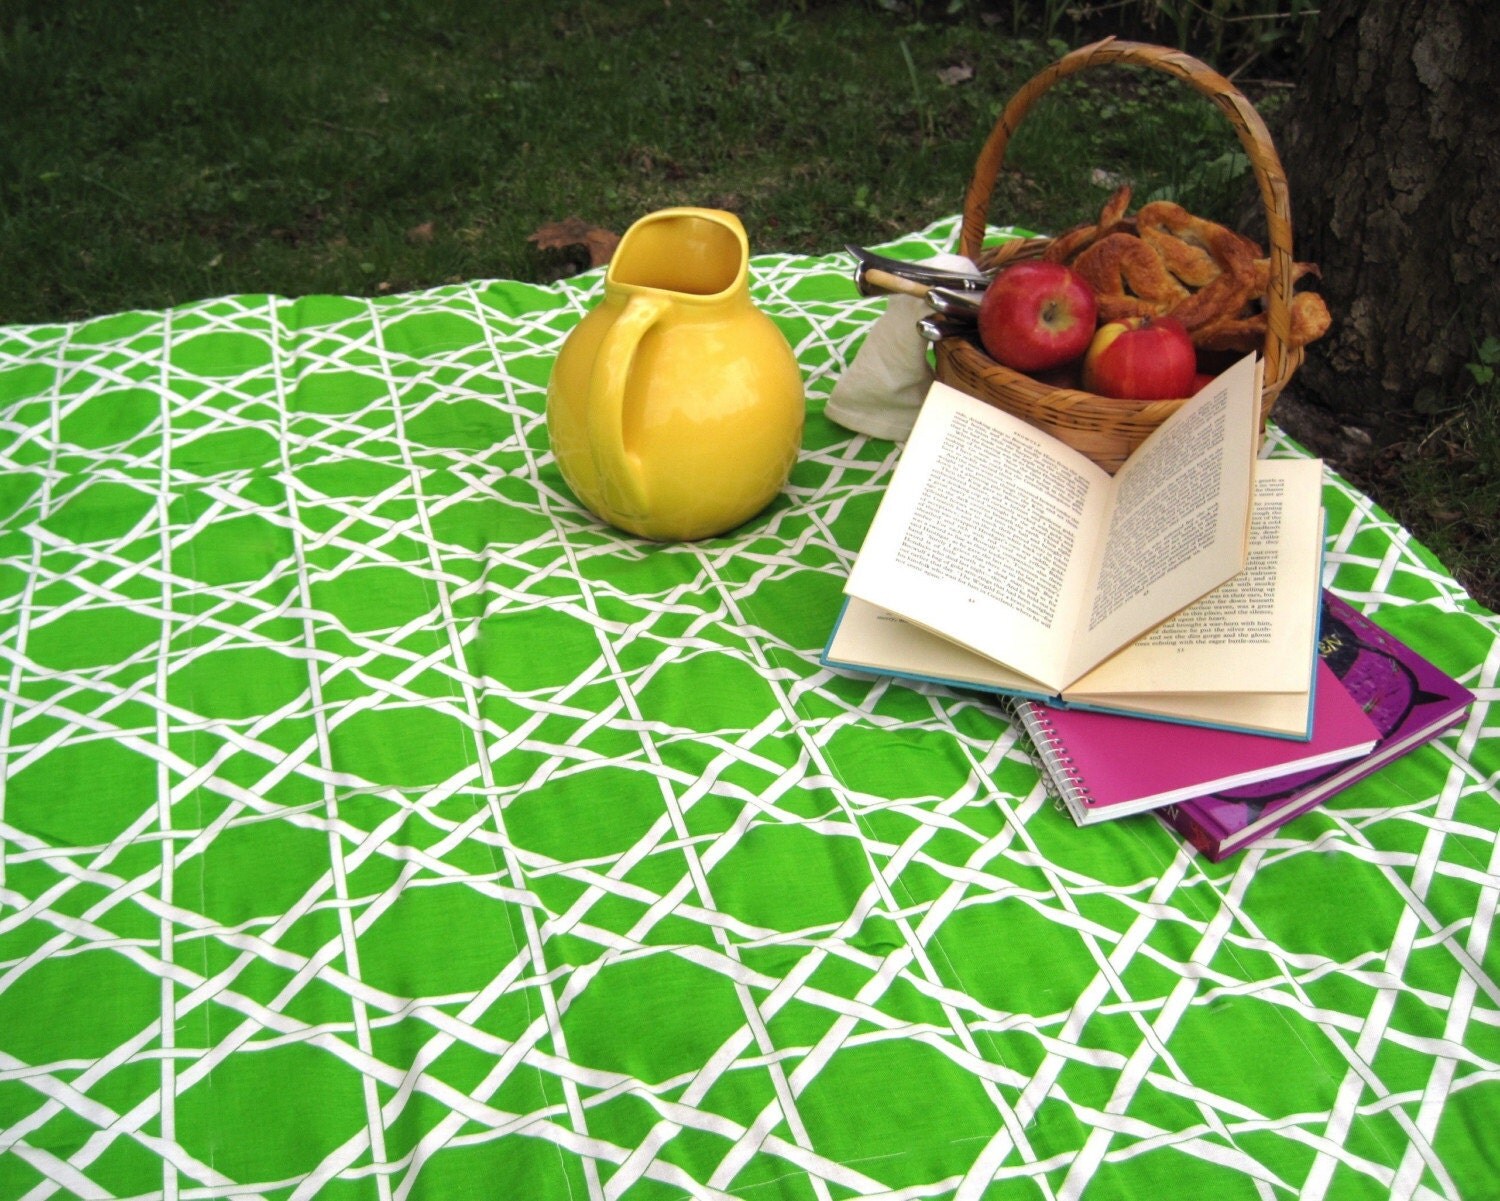 upcycled vintage picnic blanket / eco friendly in green garden